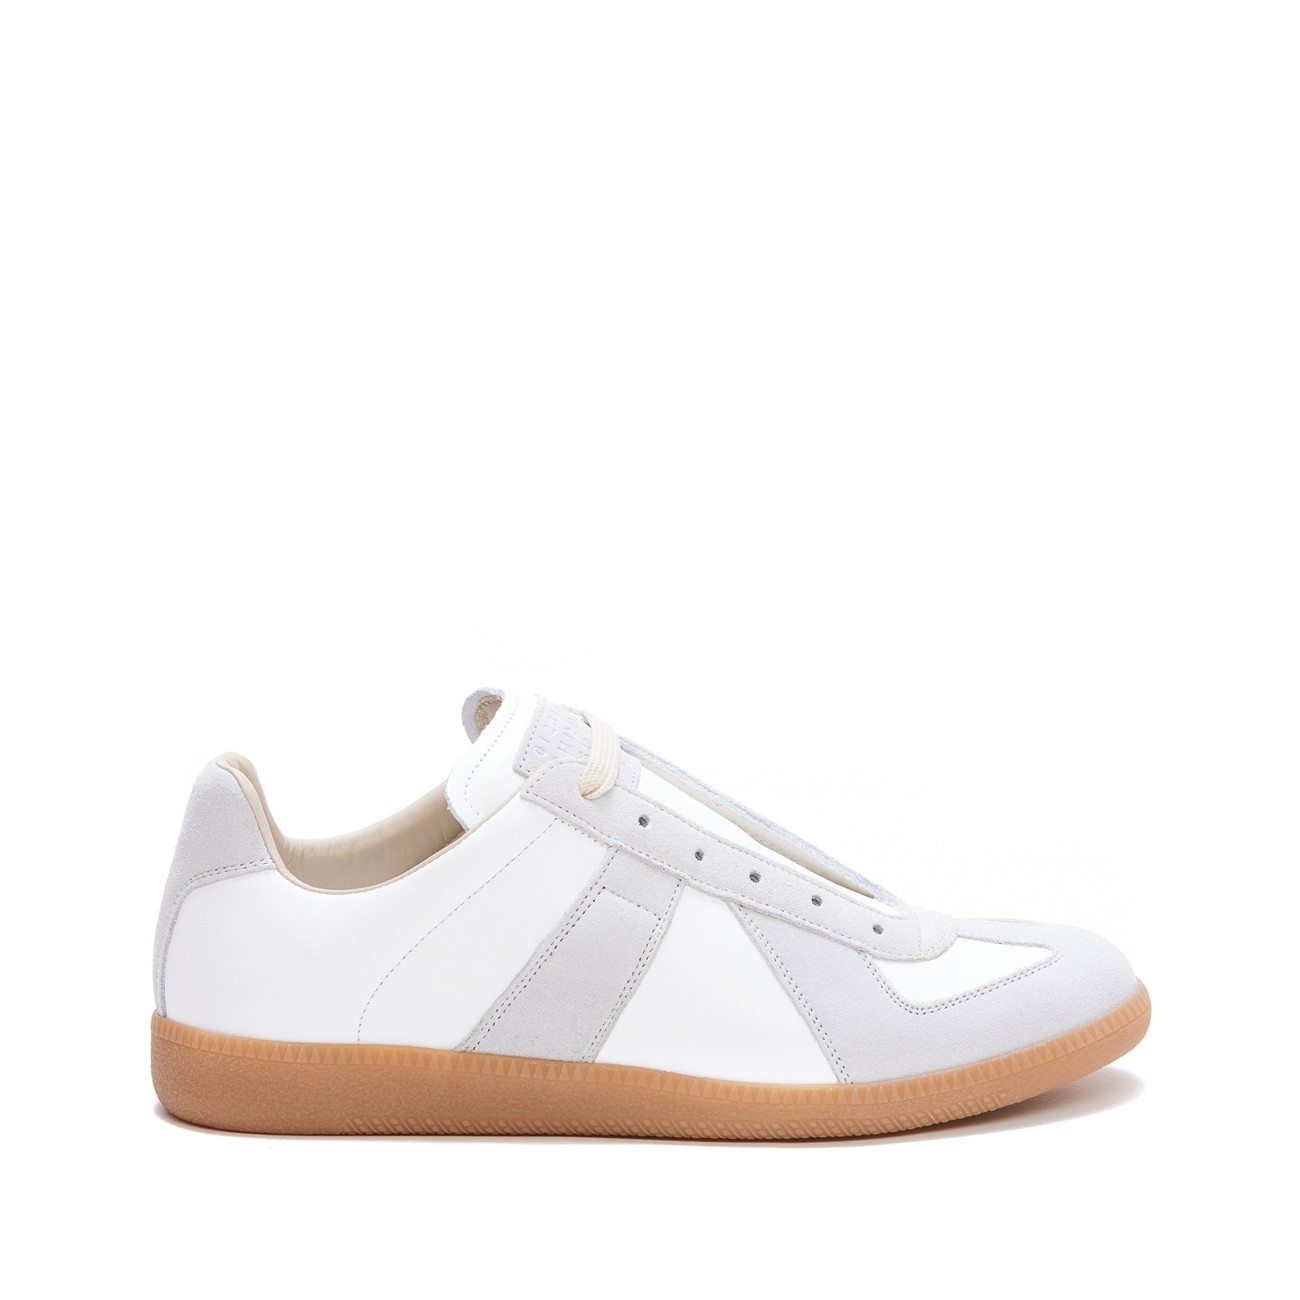 white and grey leather replica sneakers - 2